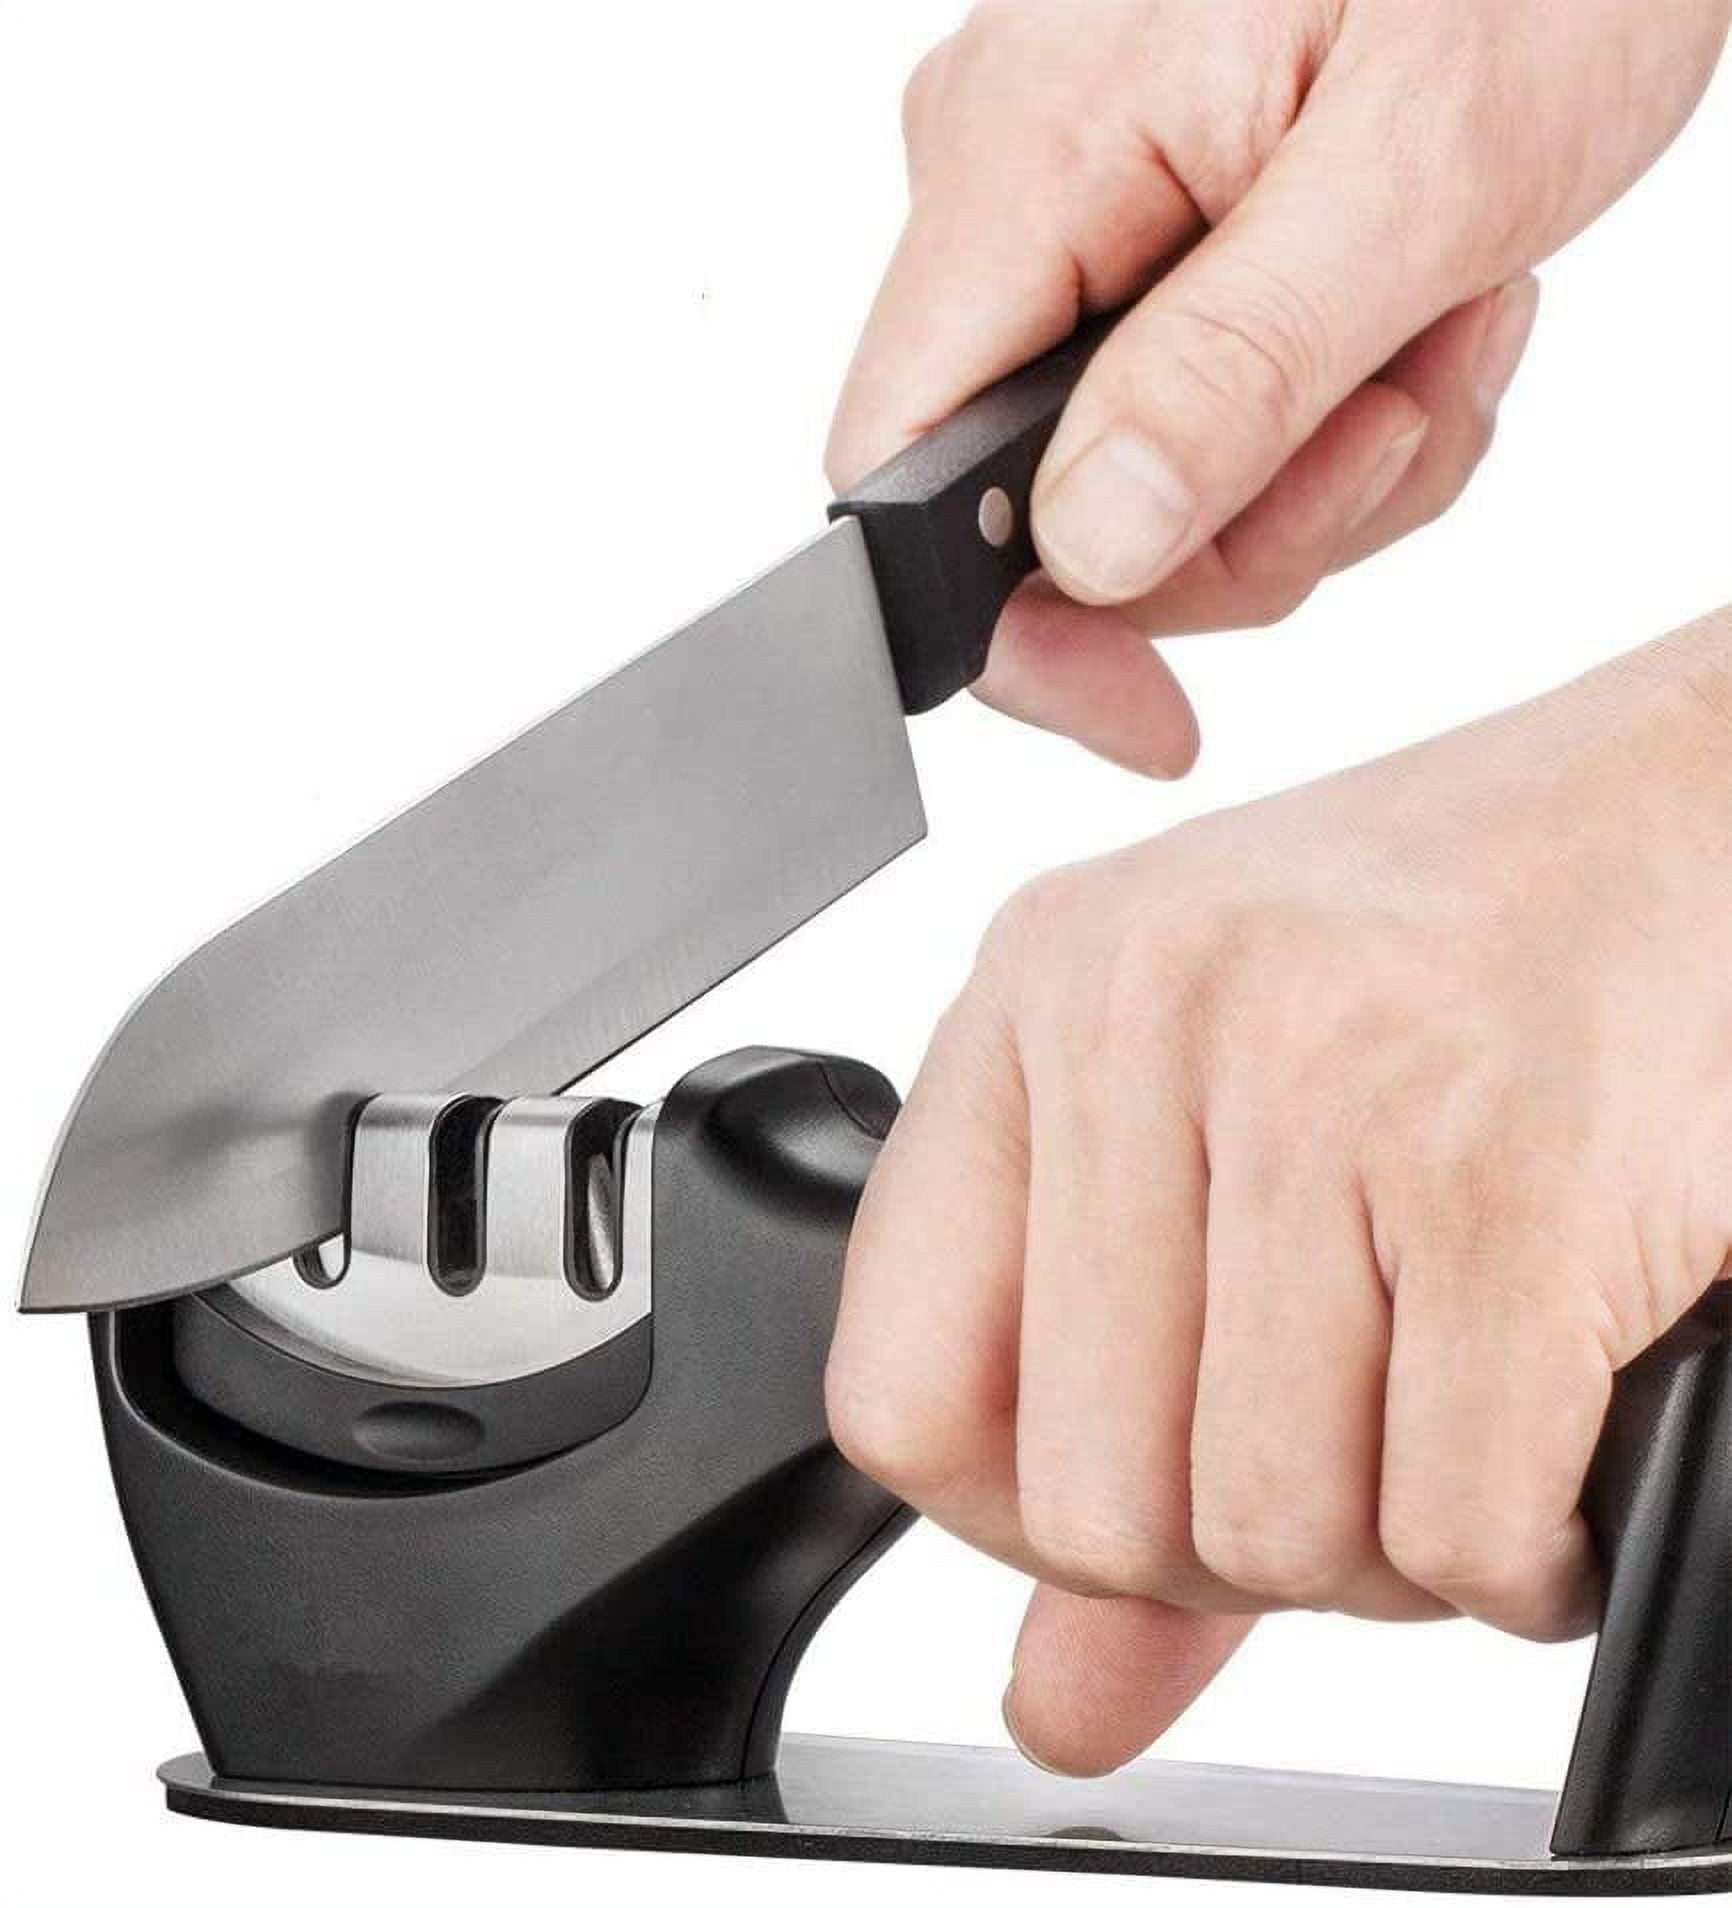 Wamery Knife and Scissors Sharpener 4-Stage. Repairs, Restores, & Polishes  Blades of Any Hardness. Ergonomic Handle & Anti-Slip Safe Pads. Kitchen